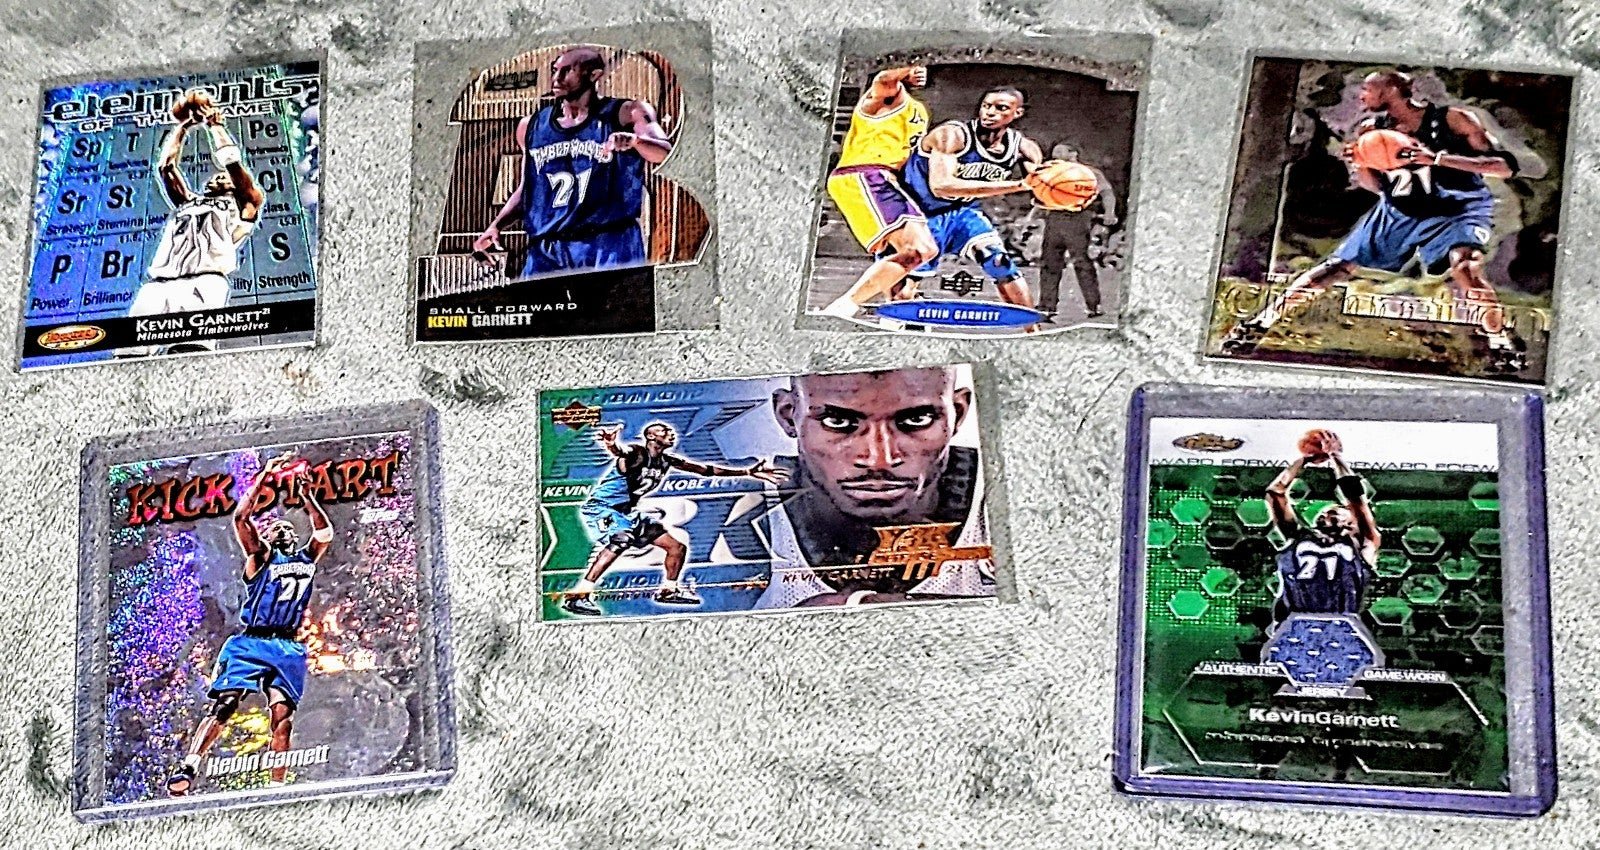 Kevin Garnett Rookie Card Lot with numbered game worn Topps Finest Patch. 3vIOmeHXT